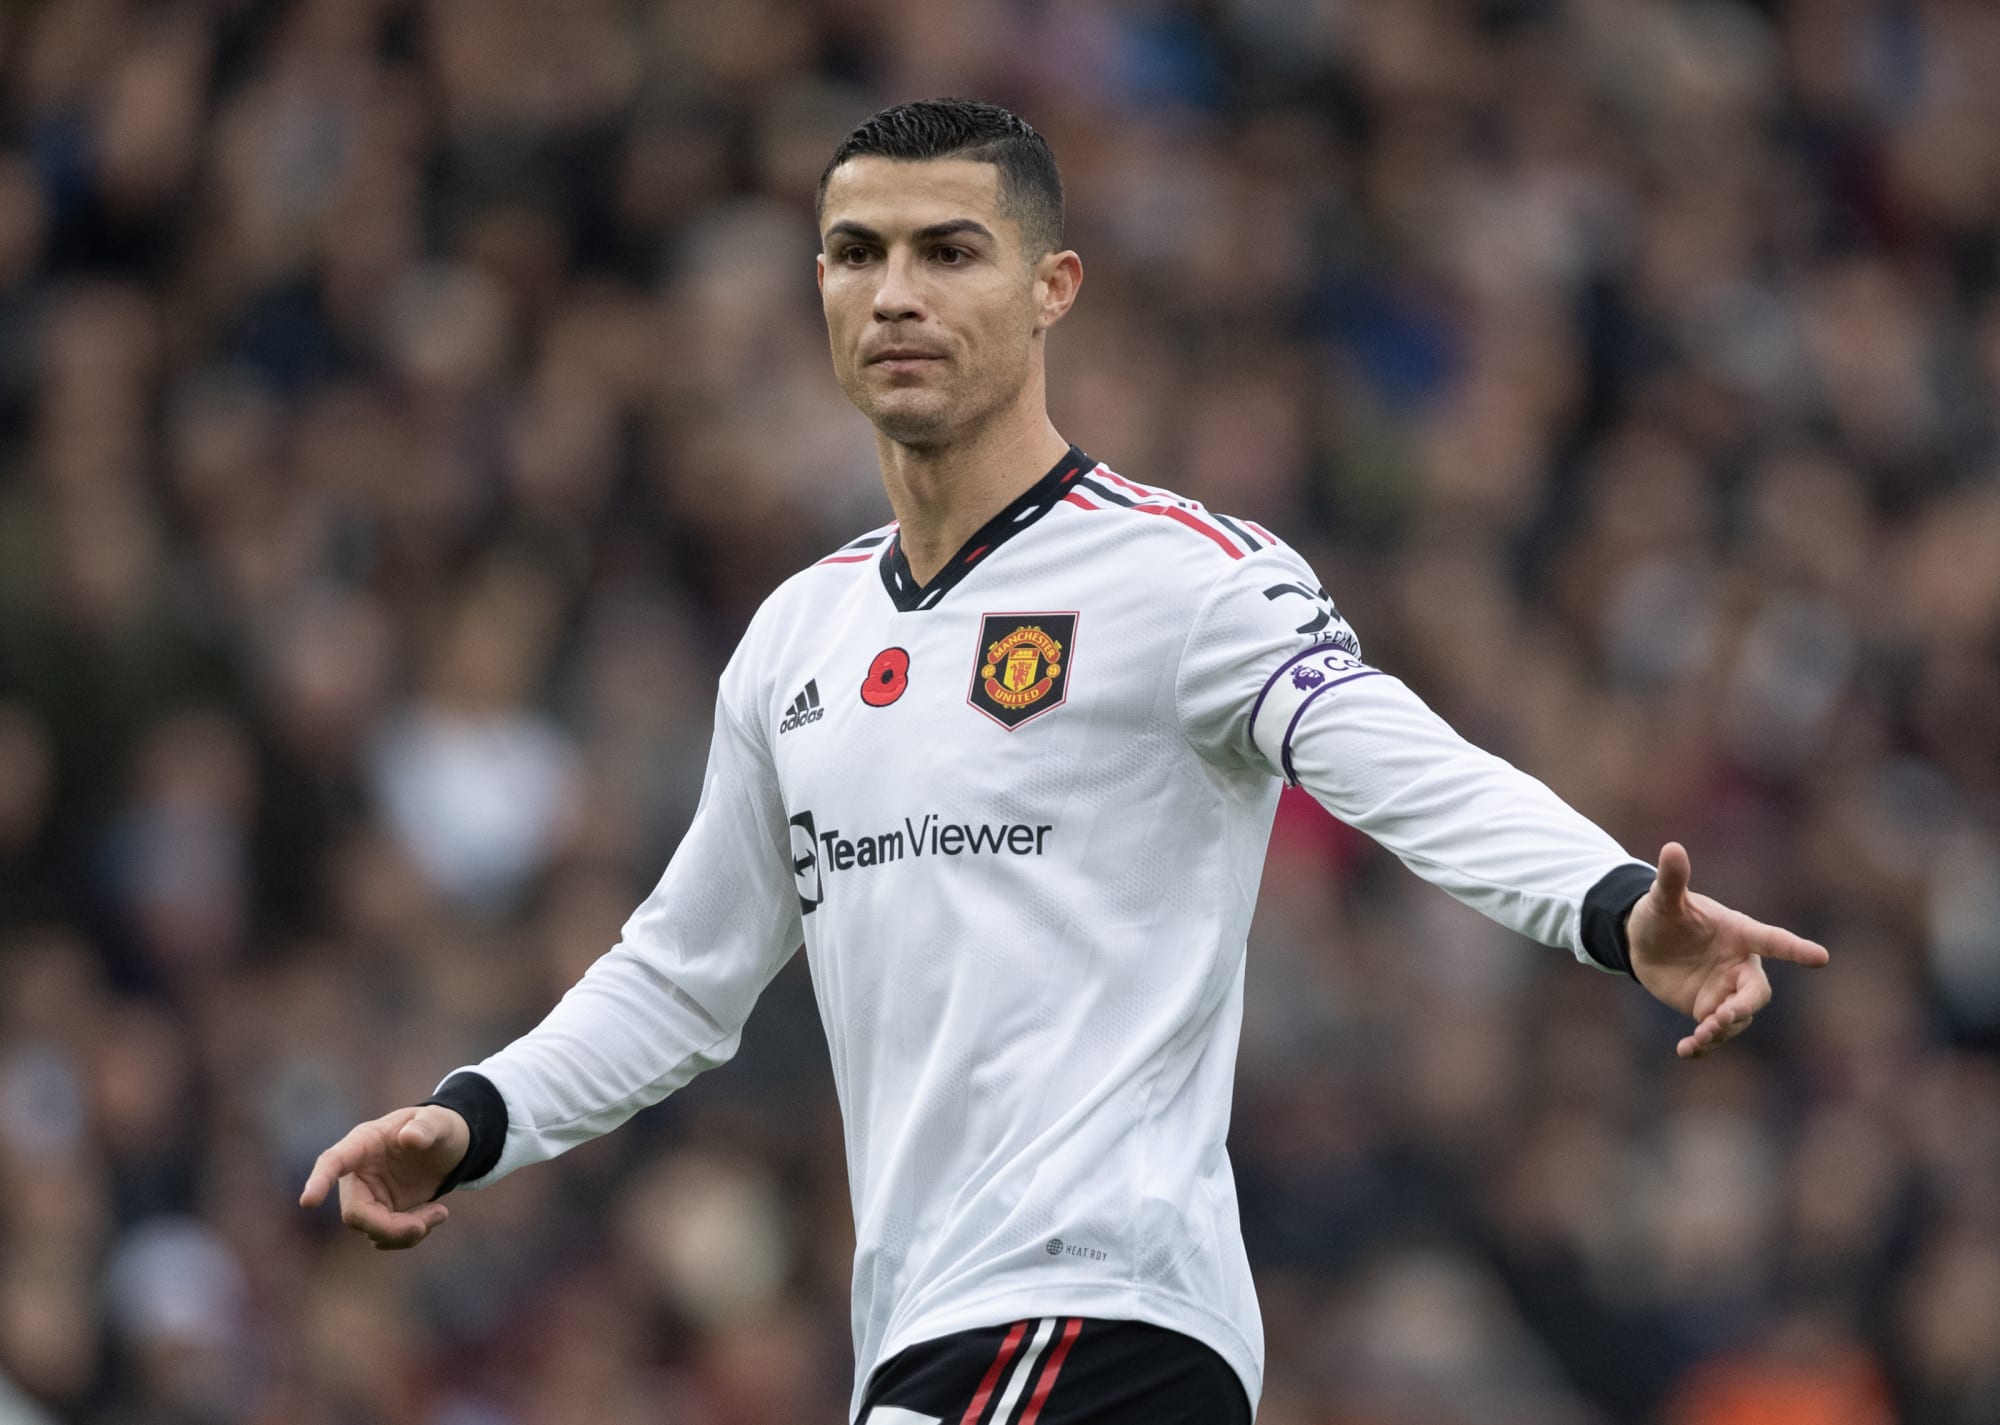 Doubts raised over potential Cristiano Ronaldo move to MLS